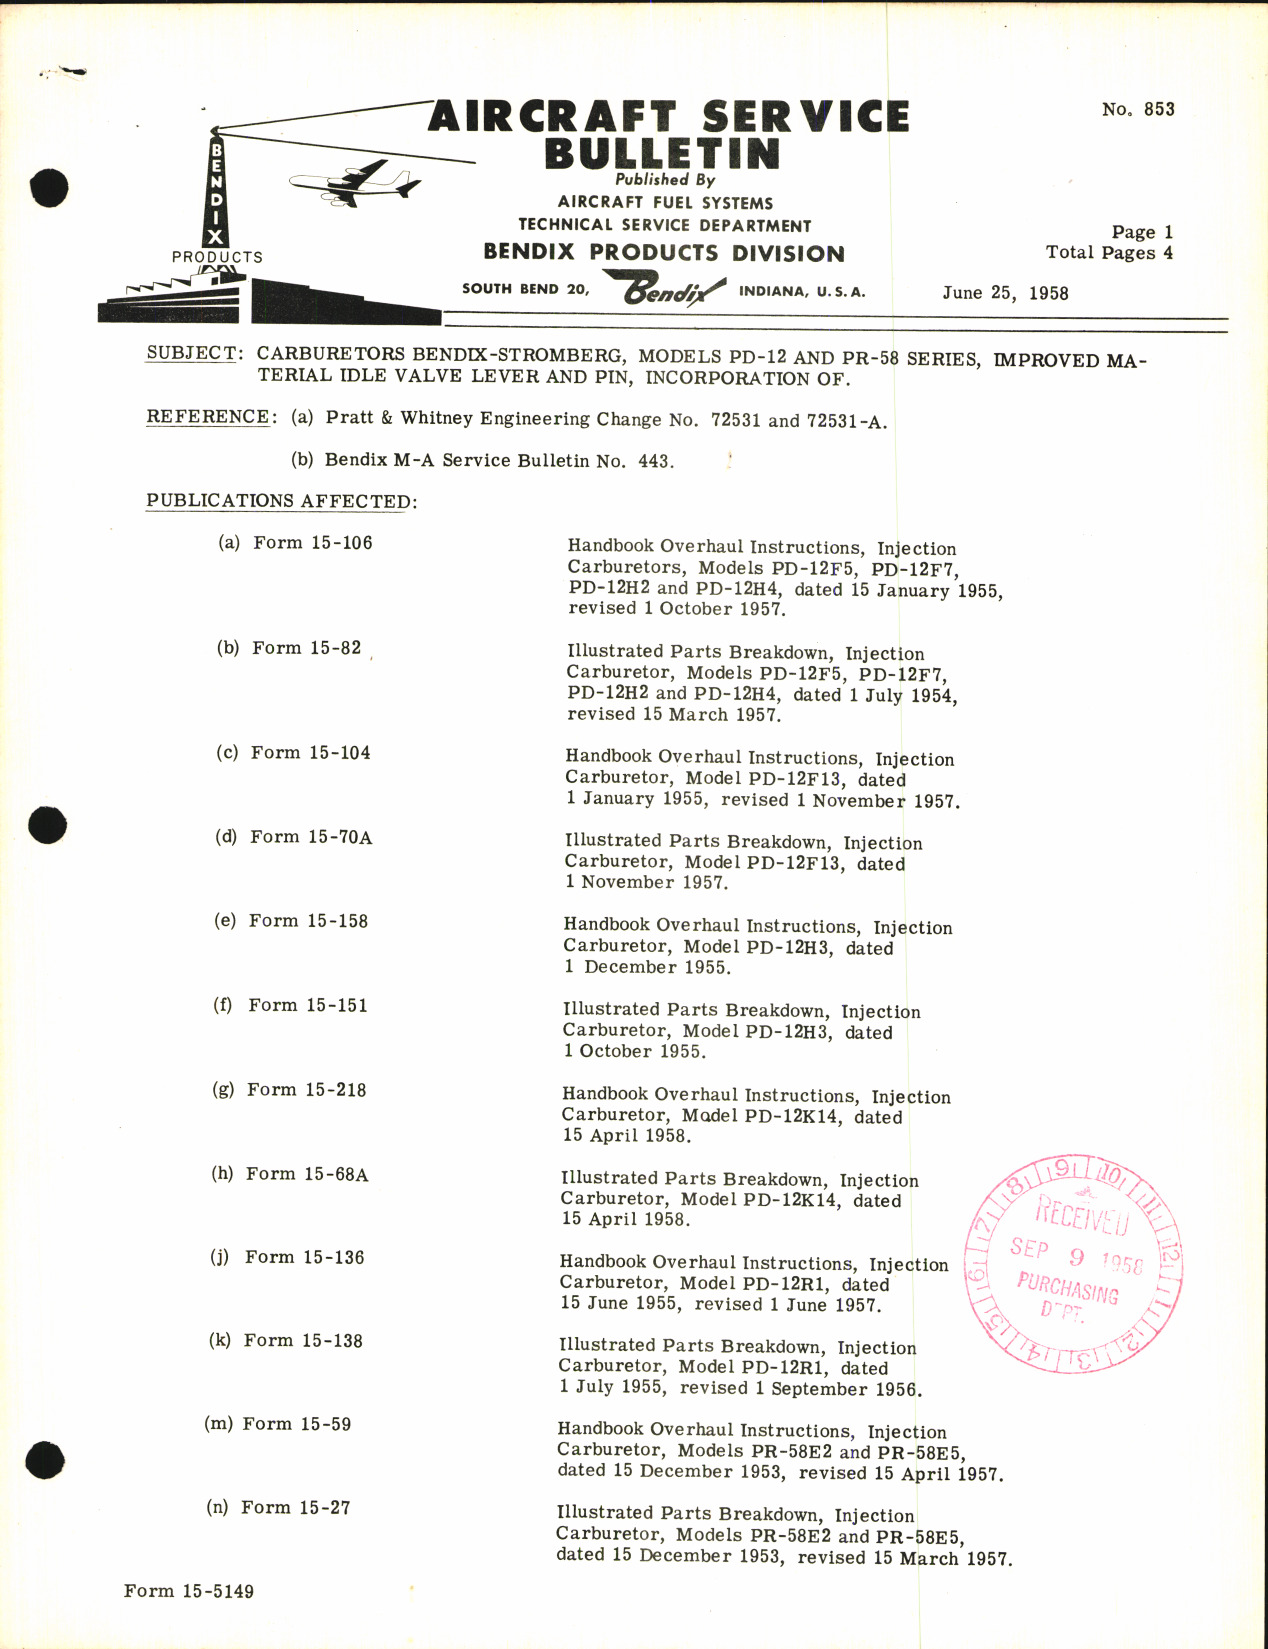 Sample page 1 from AirCorps Library document: Incorporation of Improved Material Idle Valve Lever and Pin for Models PD-12 and PR-58 Series Carburetors